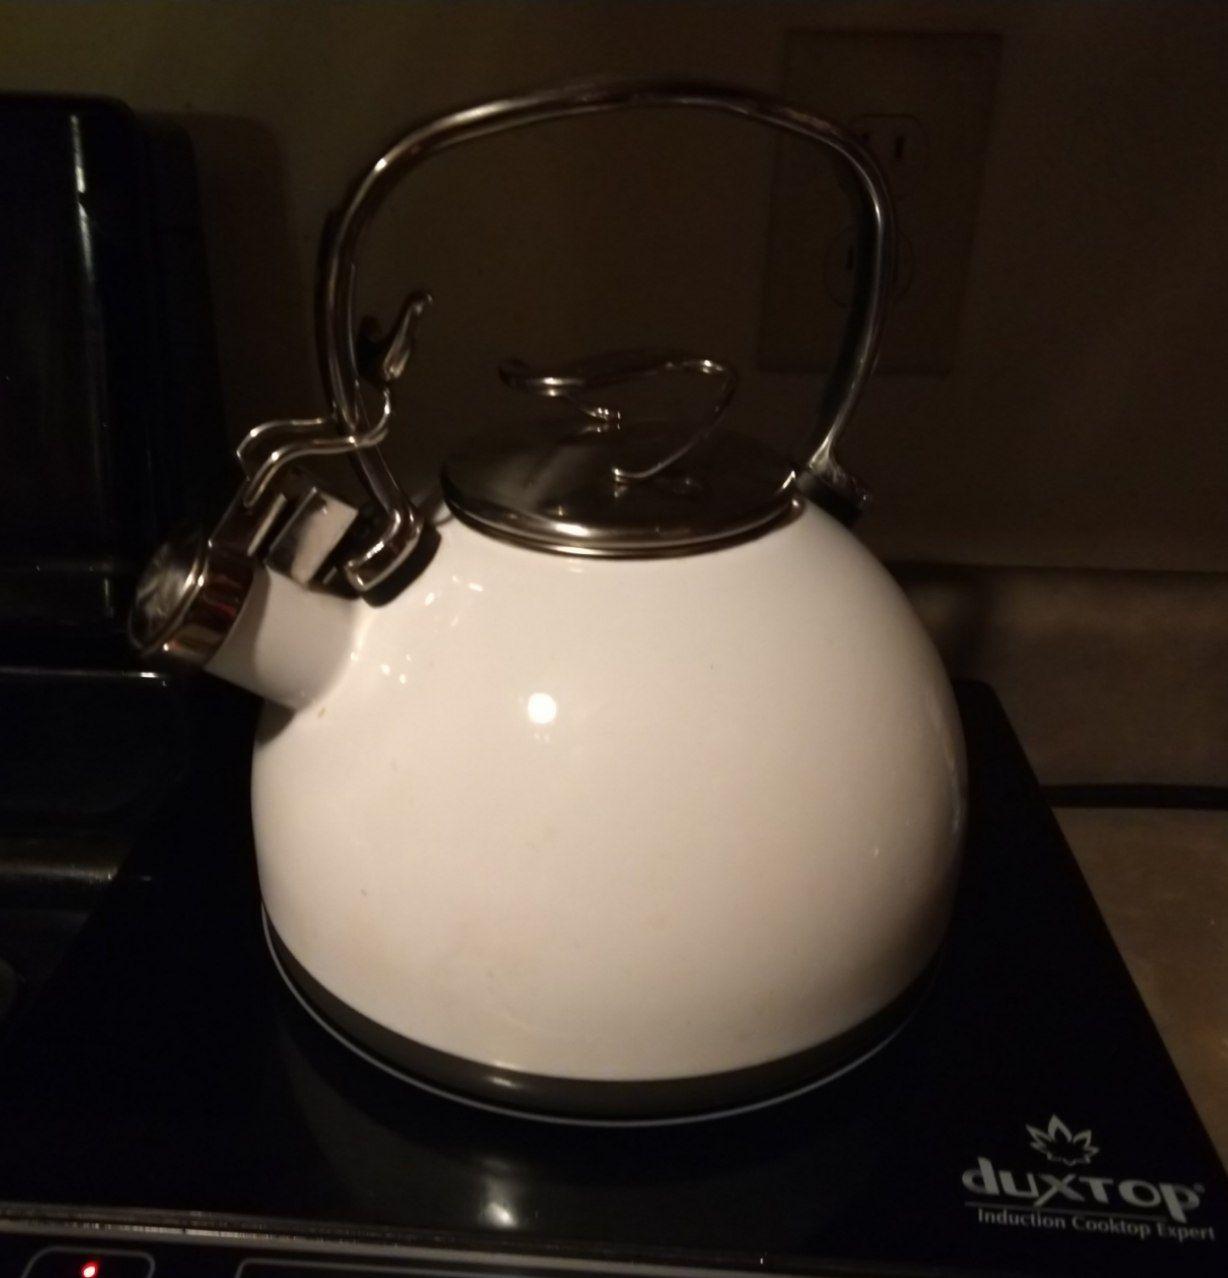 A white whistling tea kettle that I found at a thrift store, on top of my induction burner.